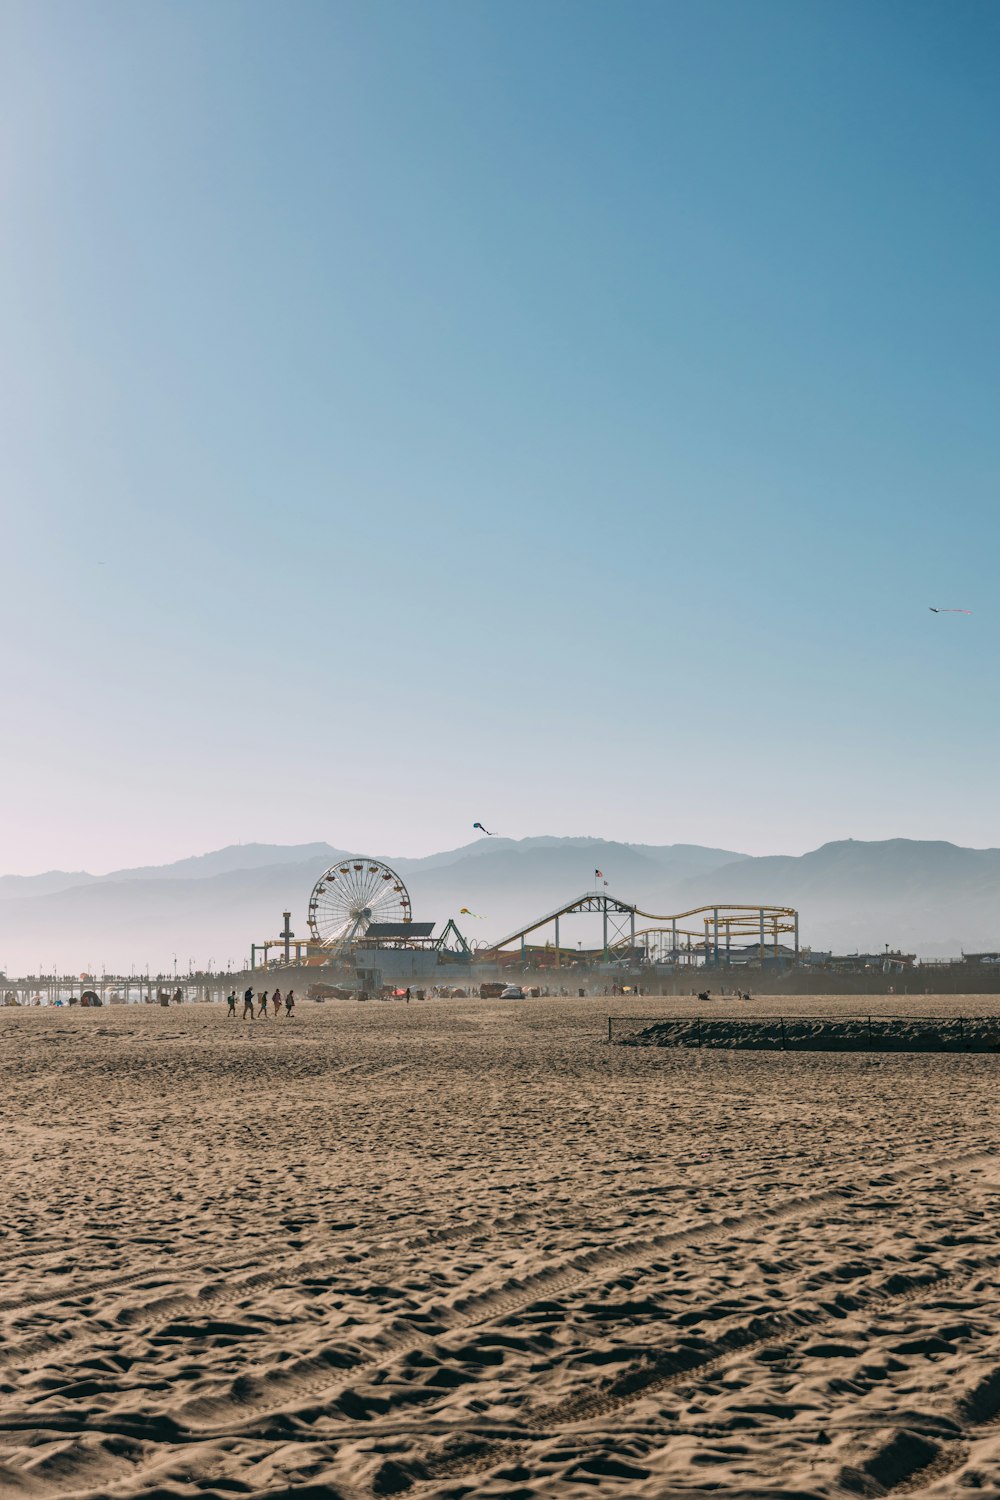 a sandy beach with a ferris wheel in the distance